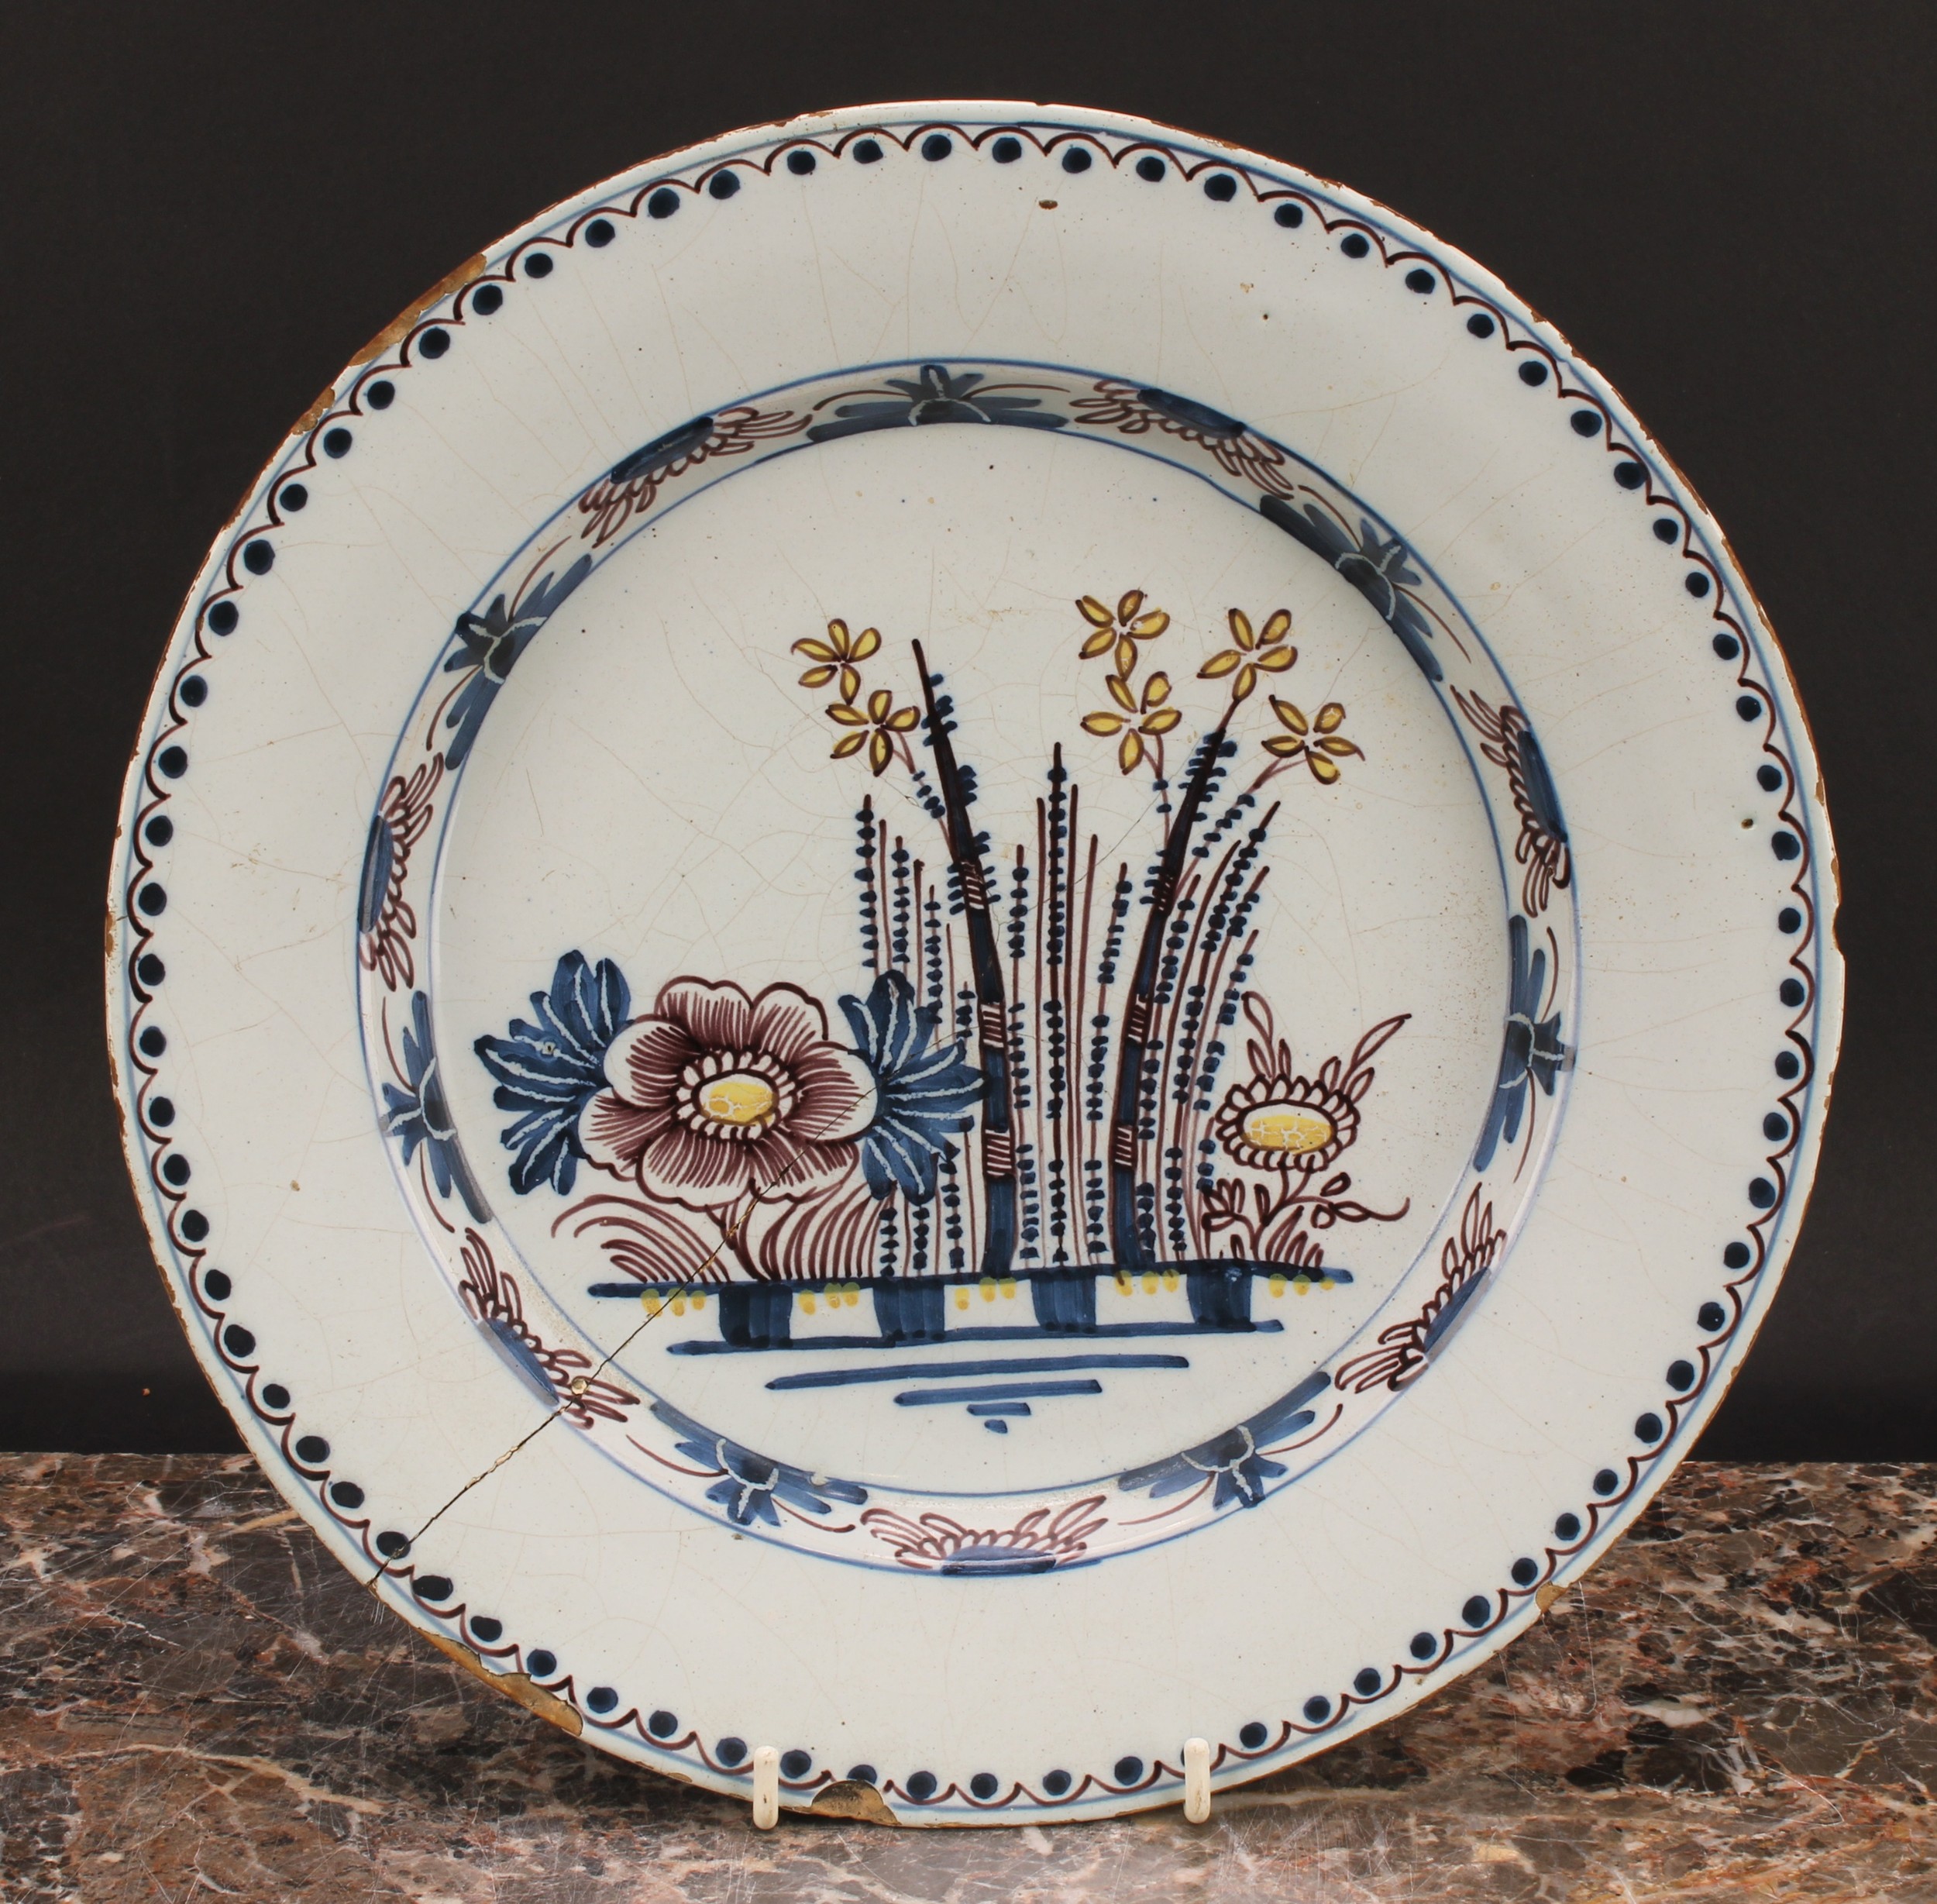 An 18th century English Delft charger, painted in underglaze blue with chinoiserie buildings, - Image 4 of 4